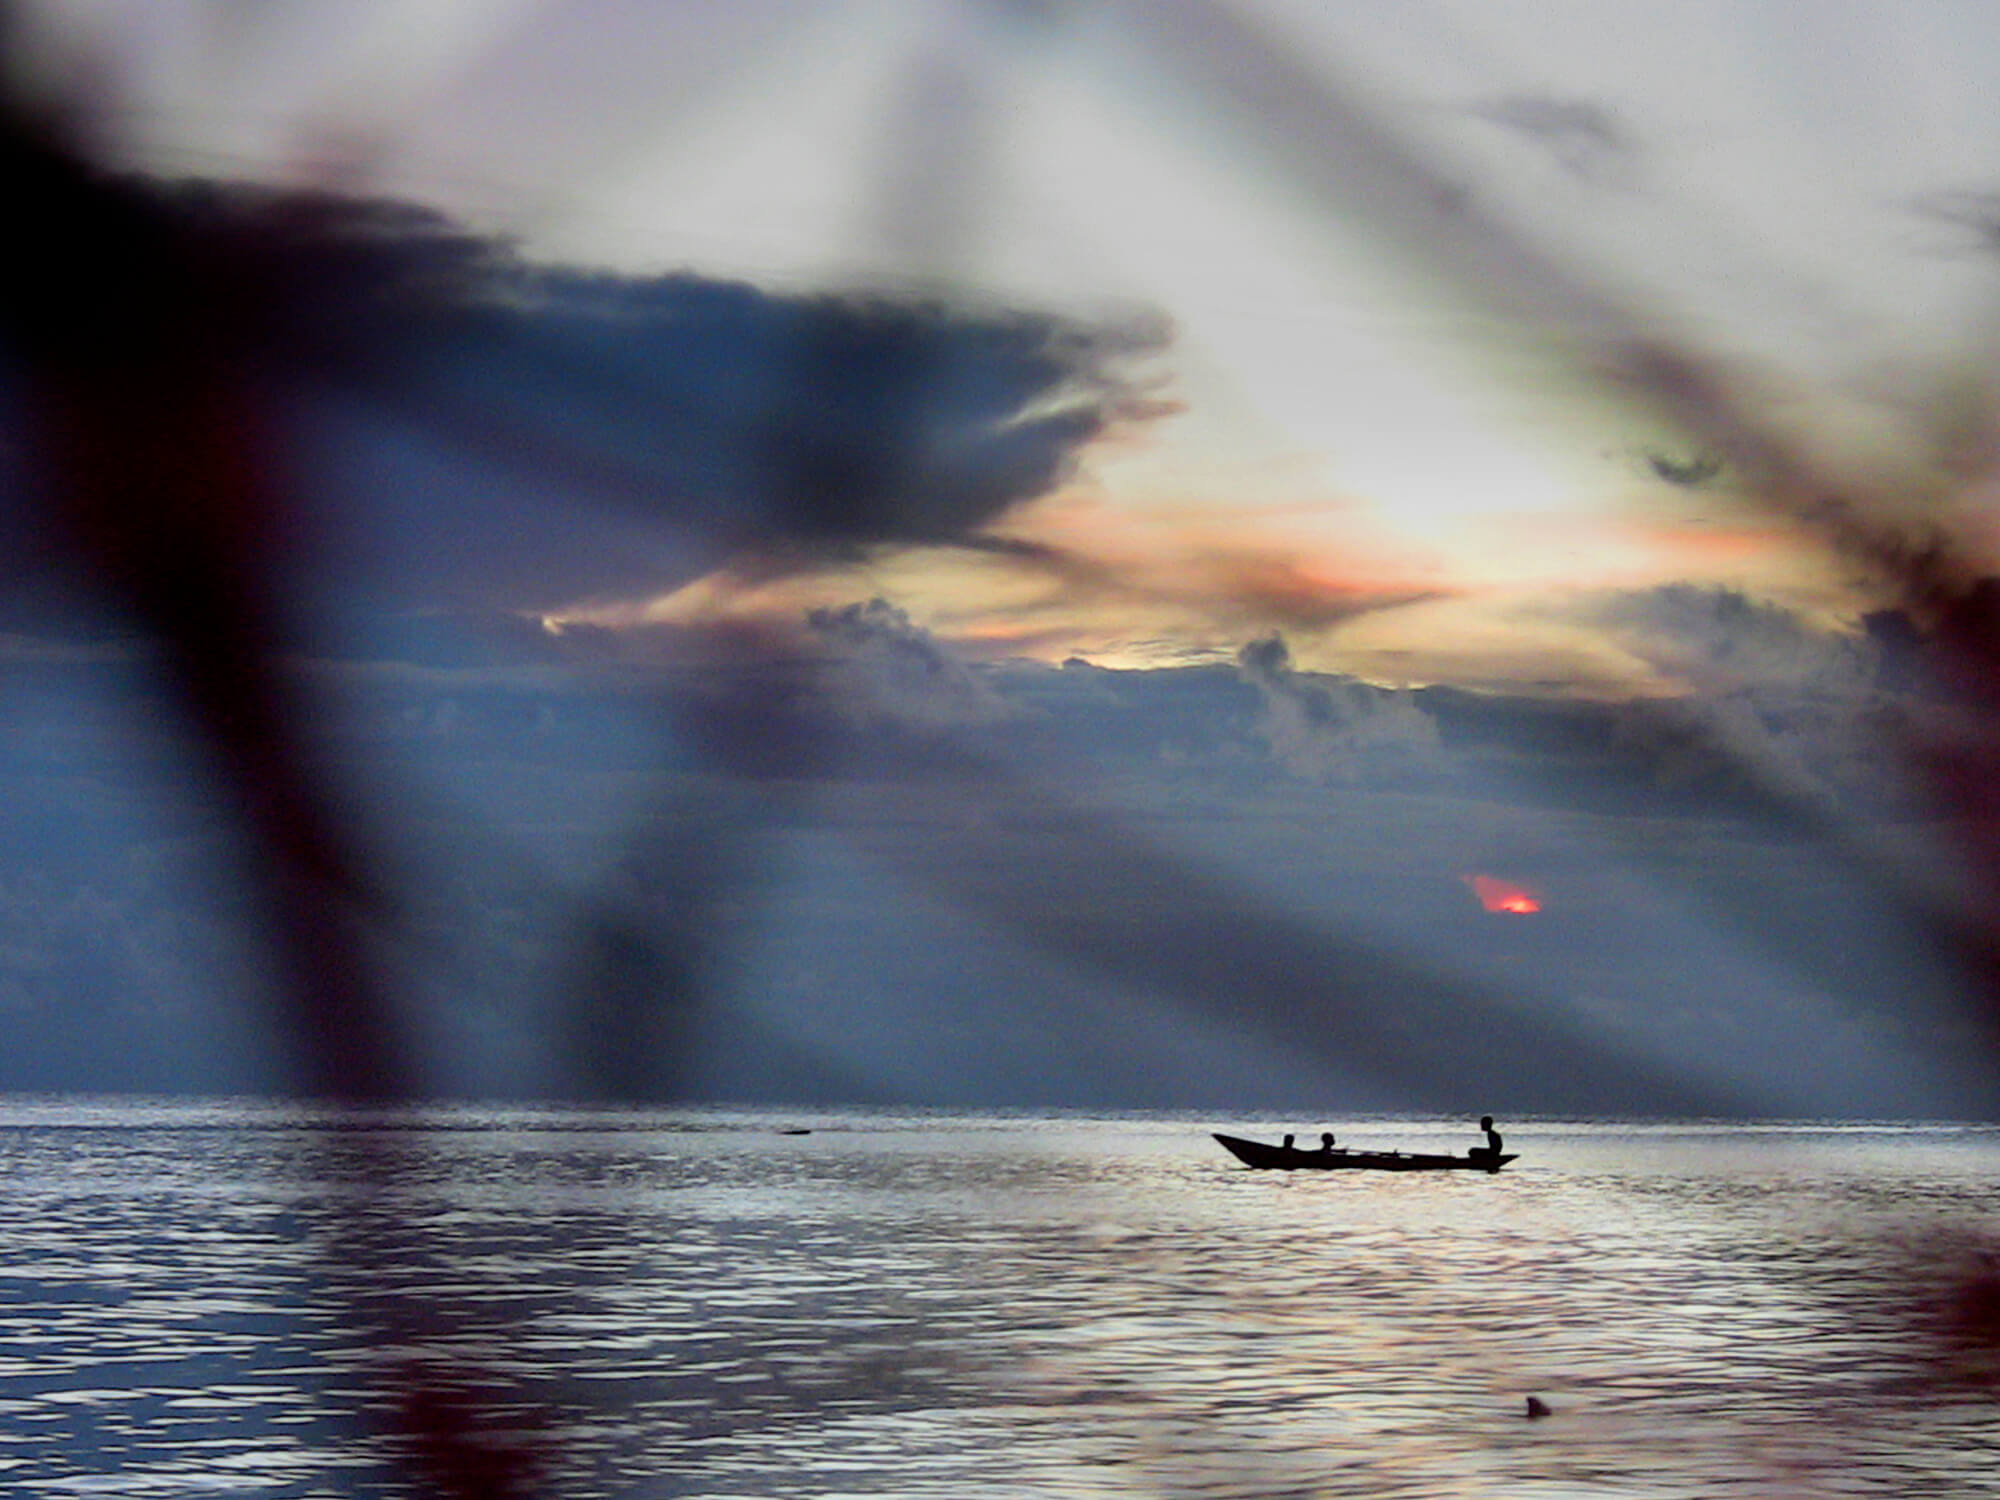 A long shot of three people seated in a small motorboat on the water at dusk. There are branches in the foreground, close to the camera and out of focus.